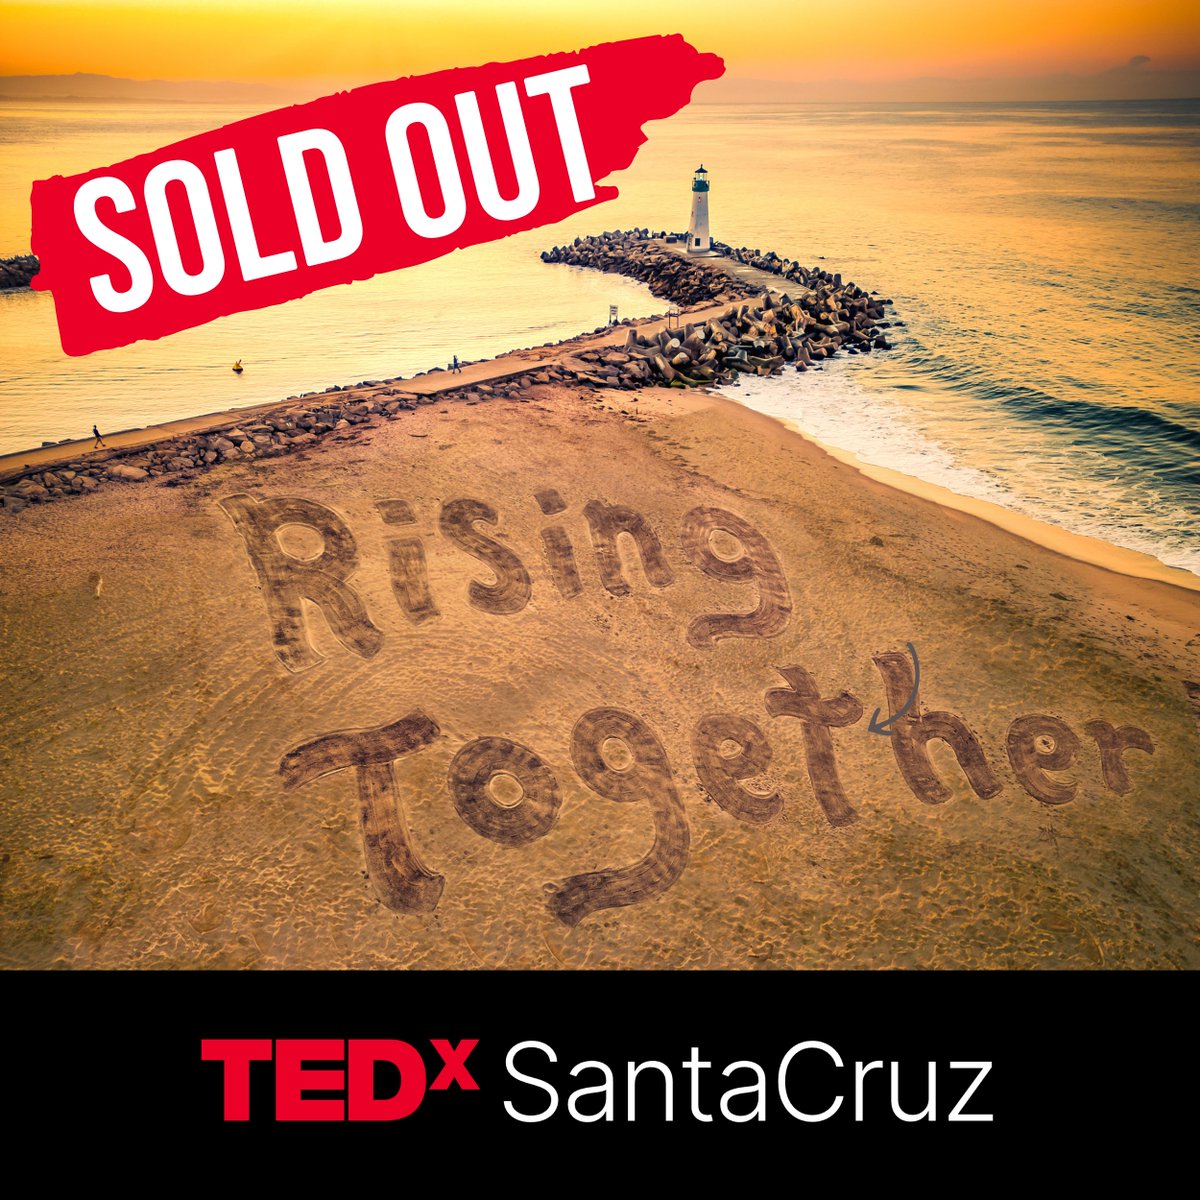 Thank you Santa Cruz County! #TEDxSantaCruz Rising Together is SOLD OUT!

Stay tuned for live stream info and consider a watch party. Details soon.

tedxsantacruz.org #risingtogether #ideasworthspreading #tedx #tedxtalks #santacruzcounty